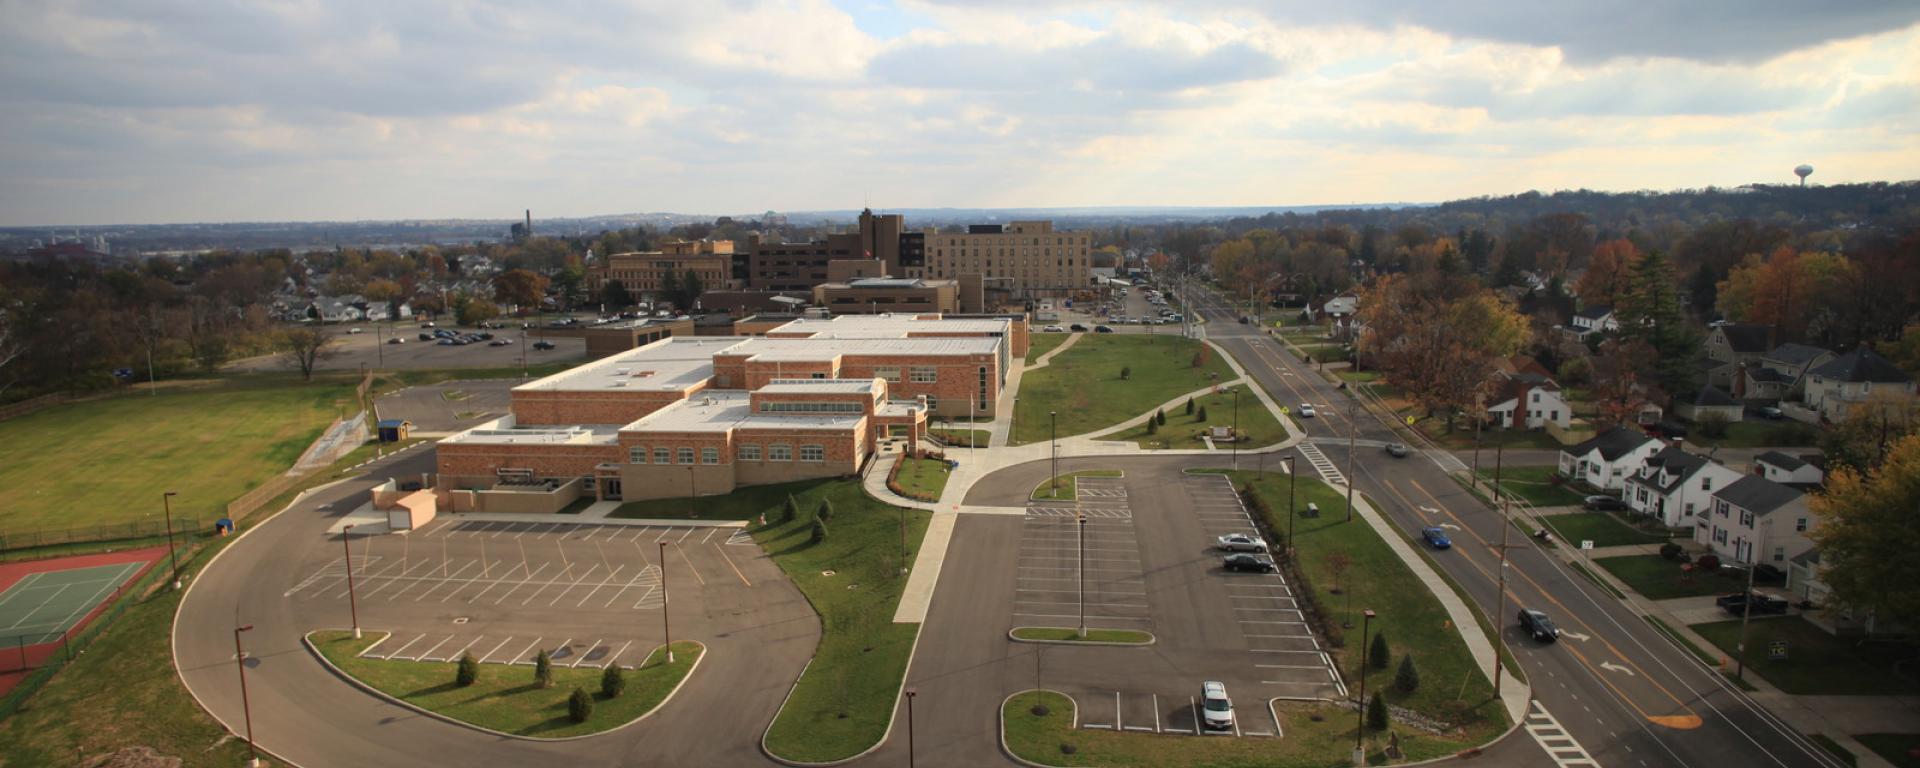 aerial of school building and parking lot